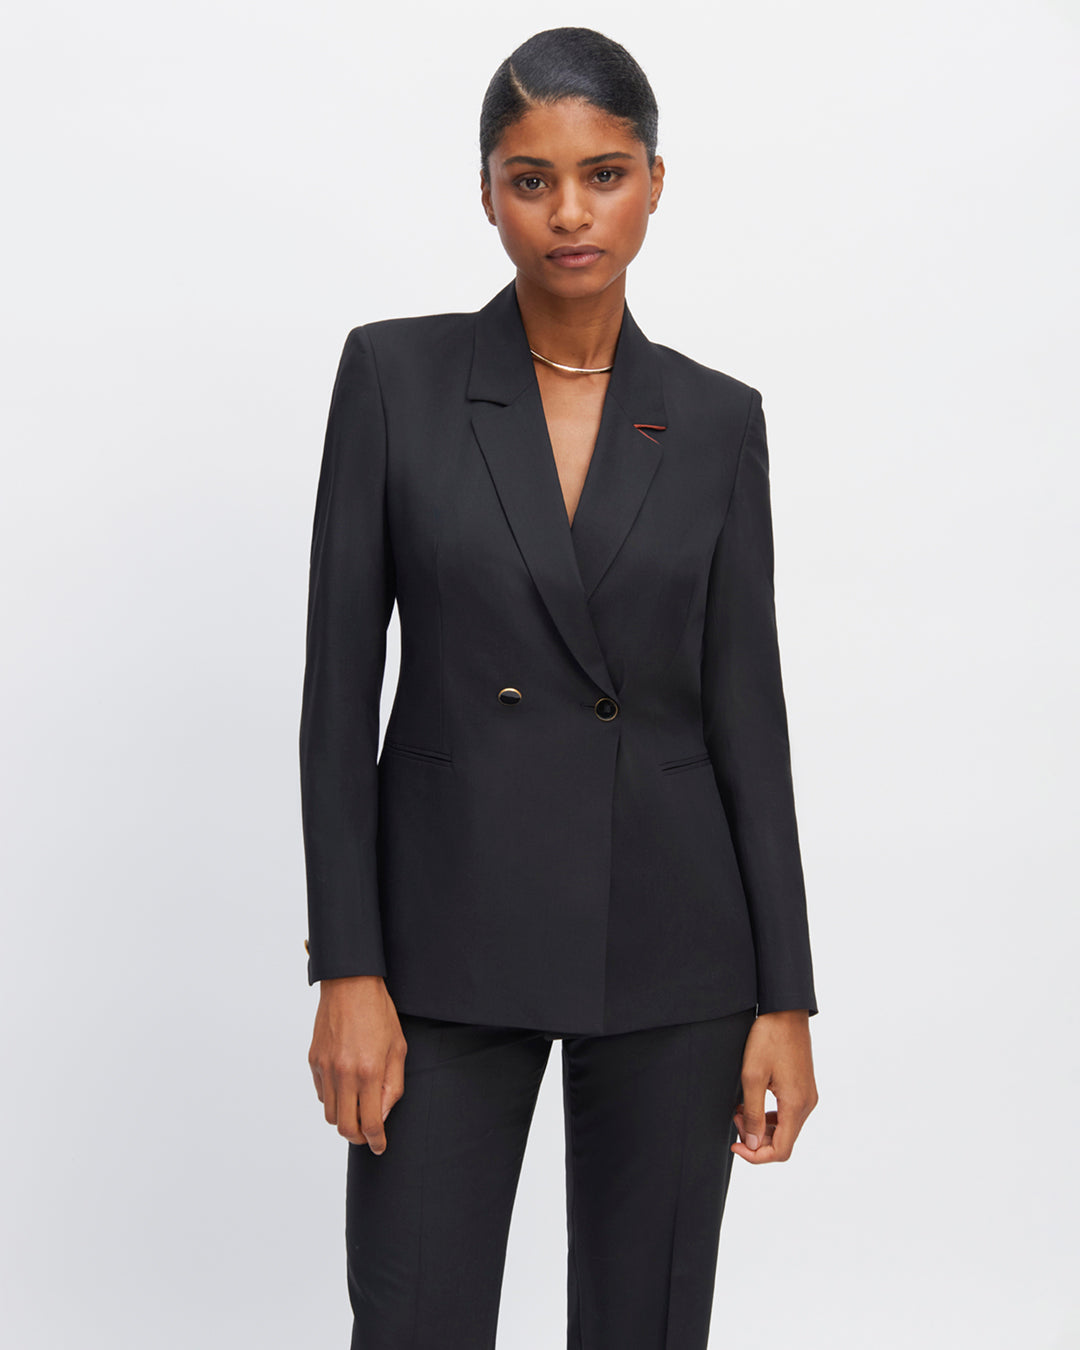 Long-sleeved-knit-jacket-Cross-cut-and-intersecting-sleeved-neck-knit-Detachable-belt-tone-on-tone-Two-short-slits-on-the-back-for-a-pretty-curved-breast-clip-17H10-knit-jacket-for-women-paris-